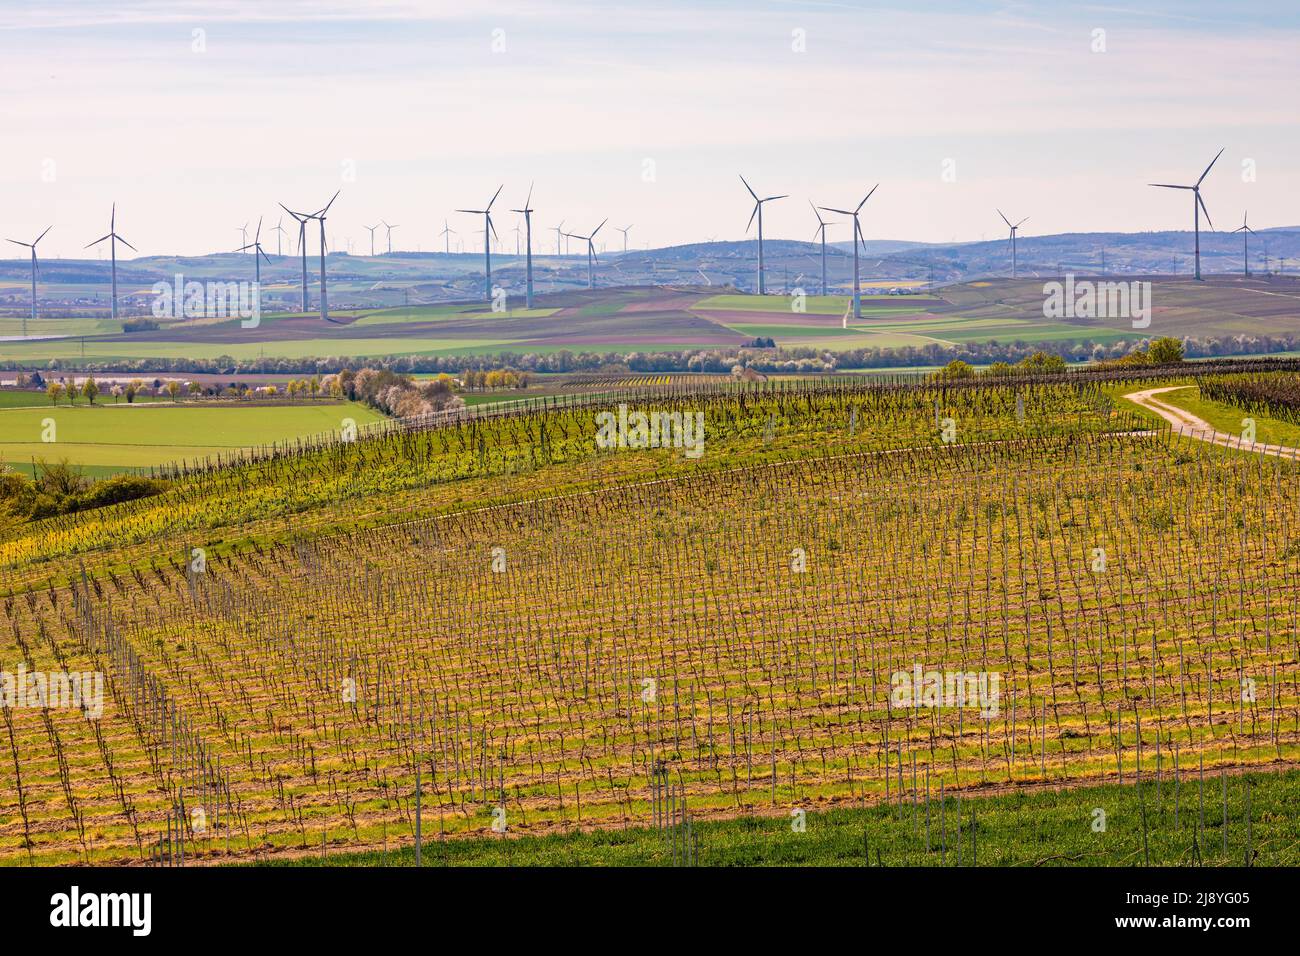 Landscape with agriculture and vineyards in front of wind power plants during the energy crisis Stock Photo